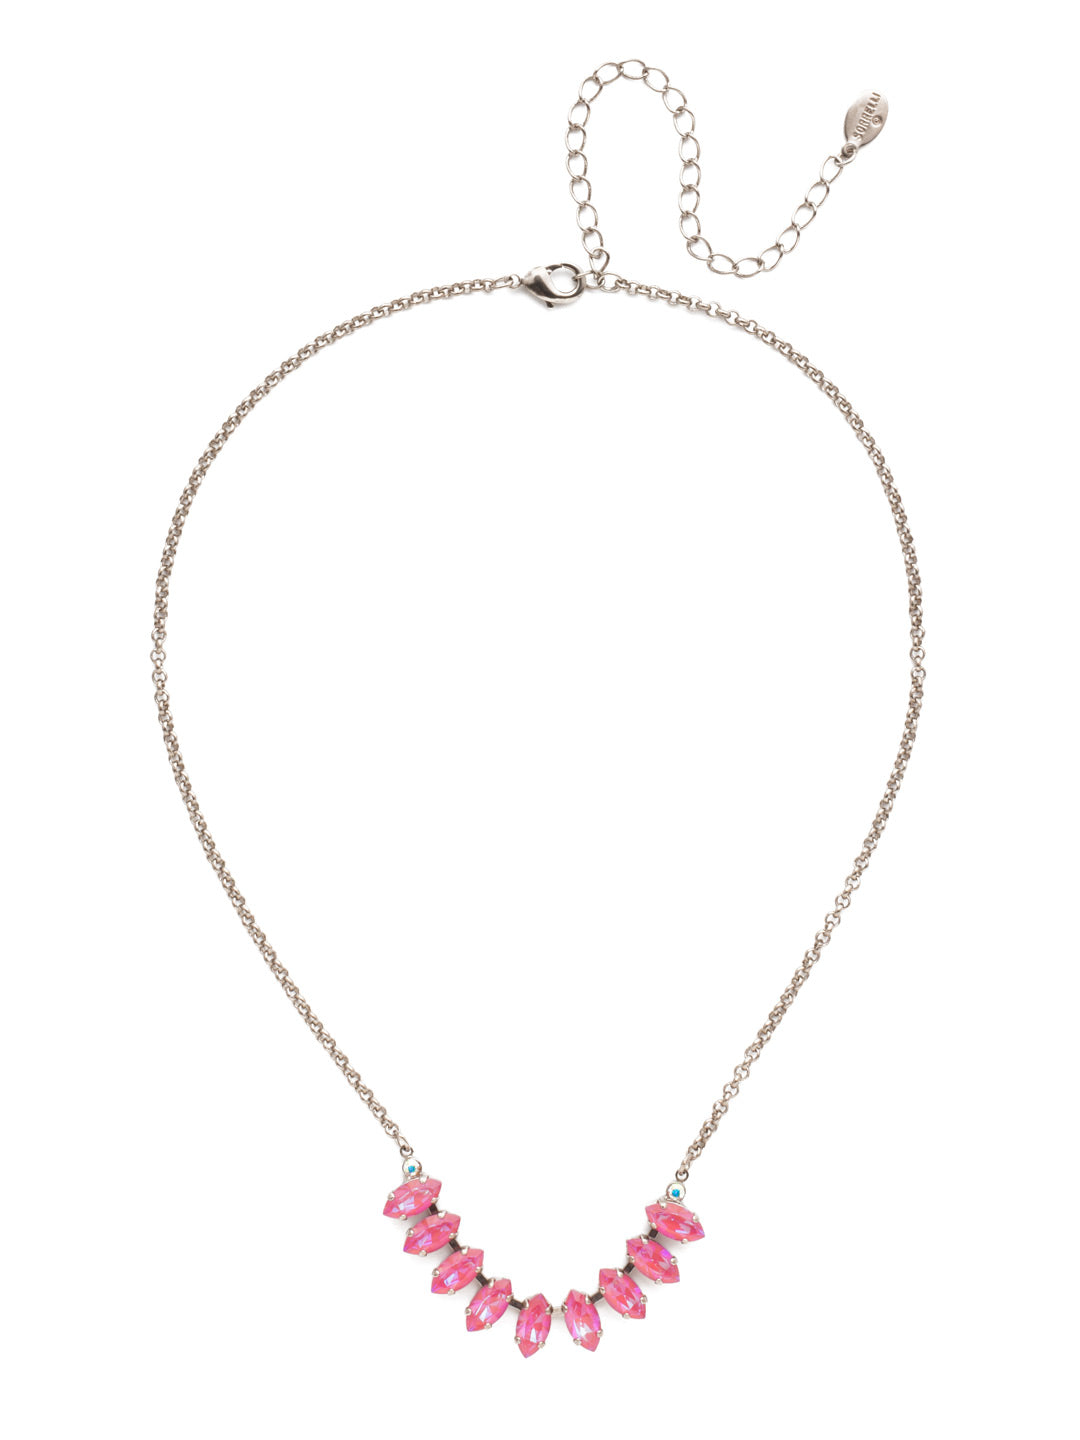 Clarissa Tennis Necklace - NEP4ASETP - The Clarissa Tennis Necklace puts a row of sparkling navette crystals front and center. Put it on when you want to be there, too. From Sorrelli's Electric Pink collection in our Antique Silver-tone finish.